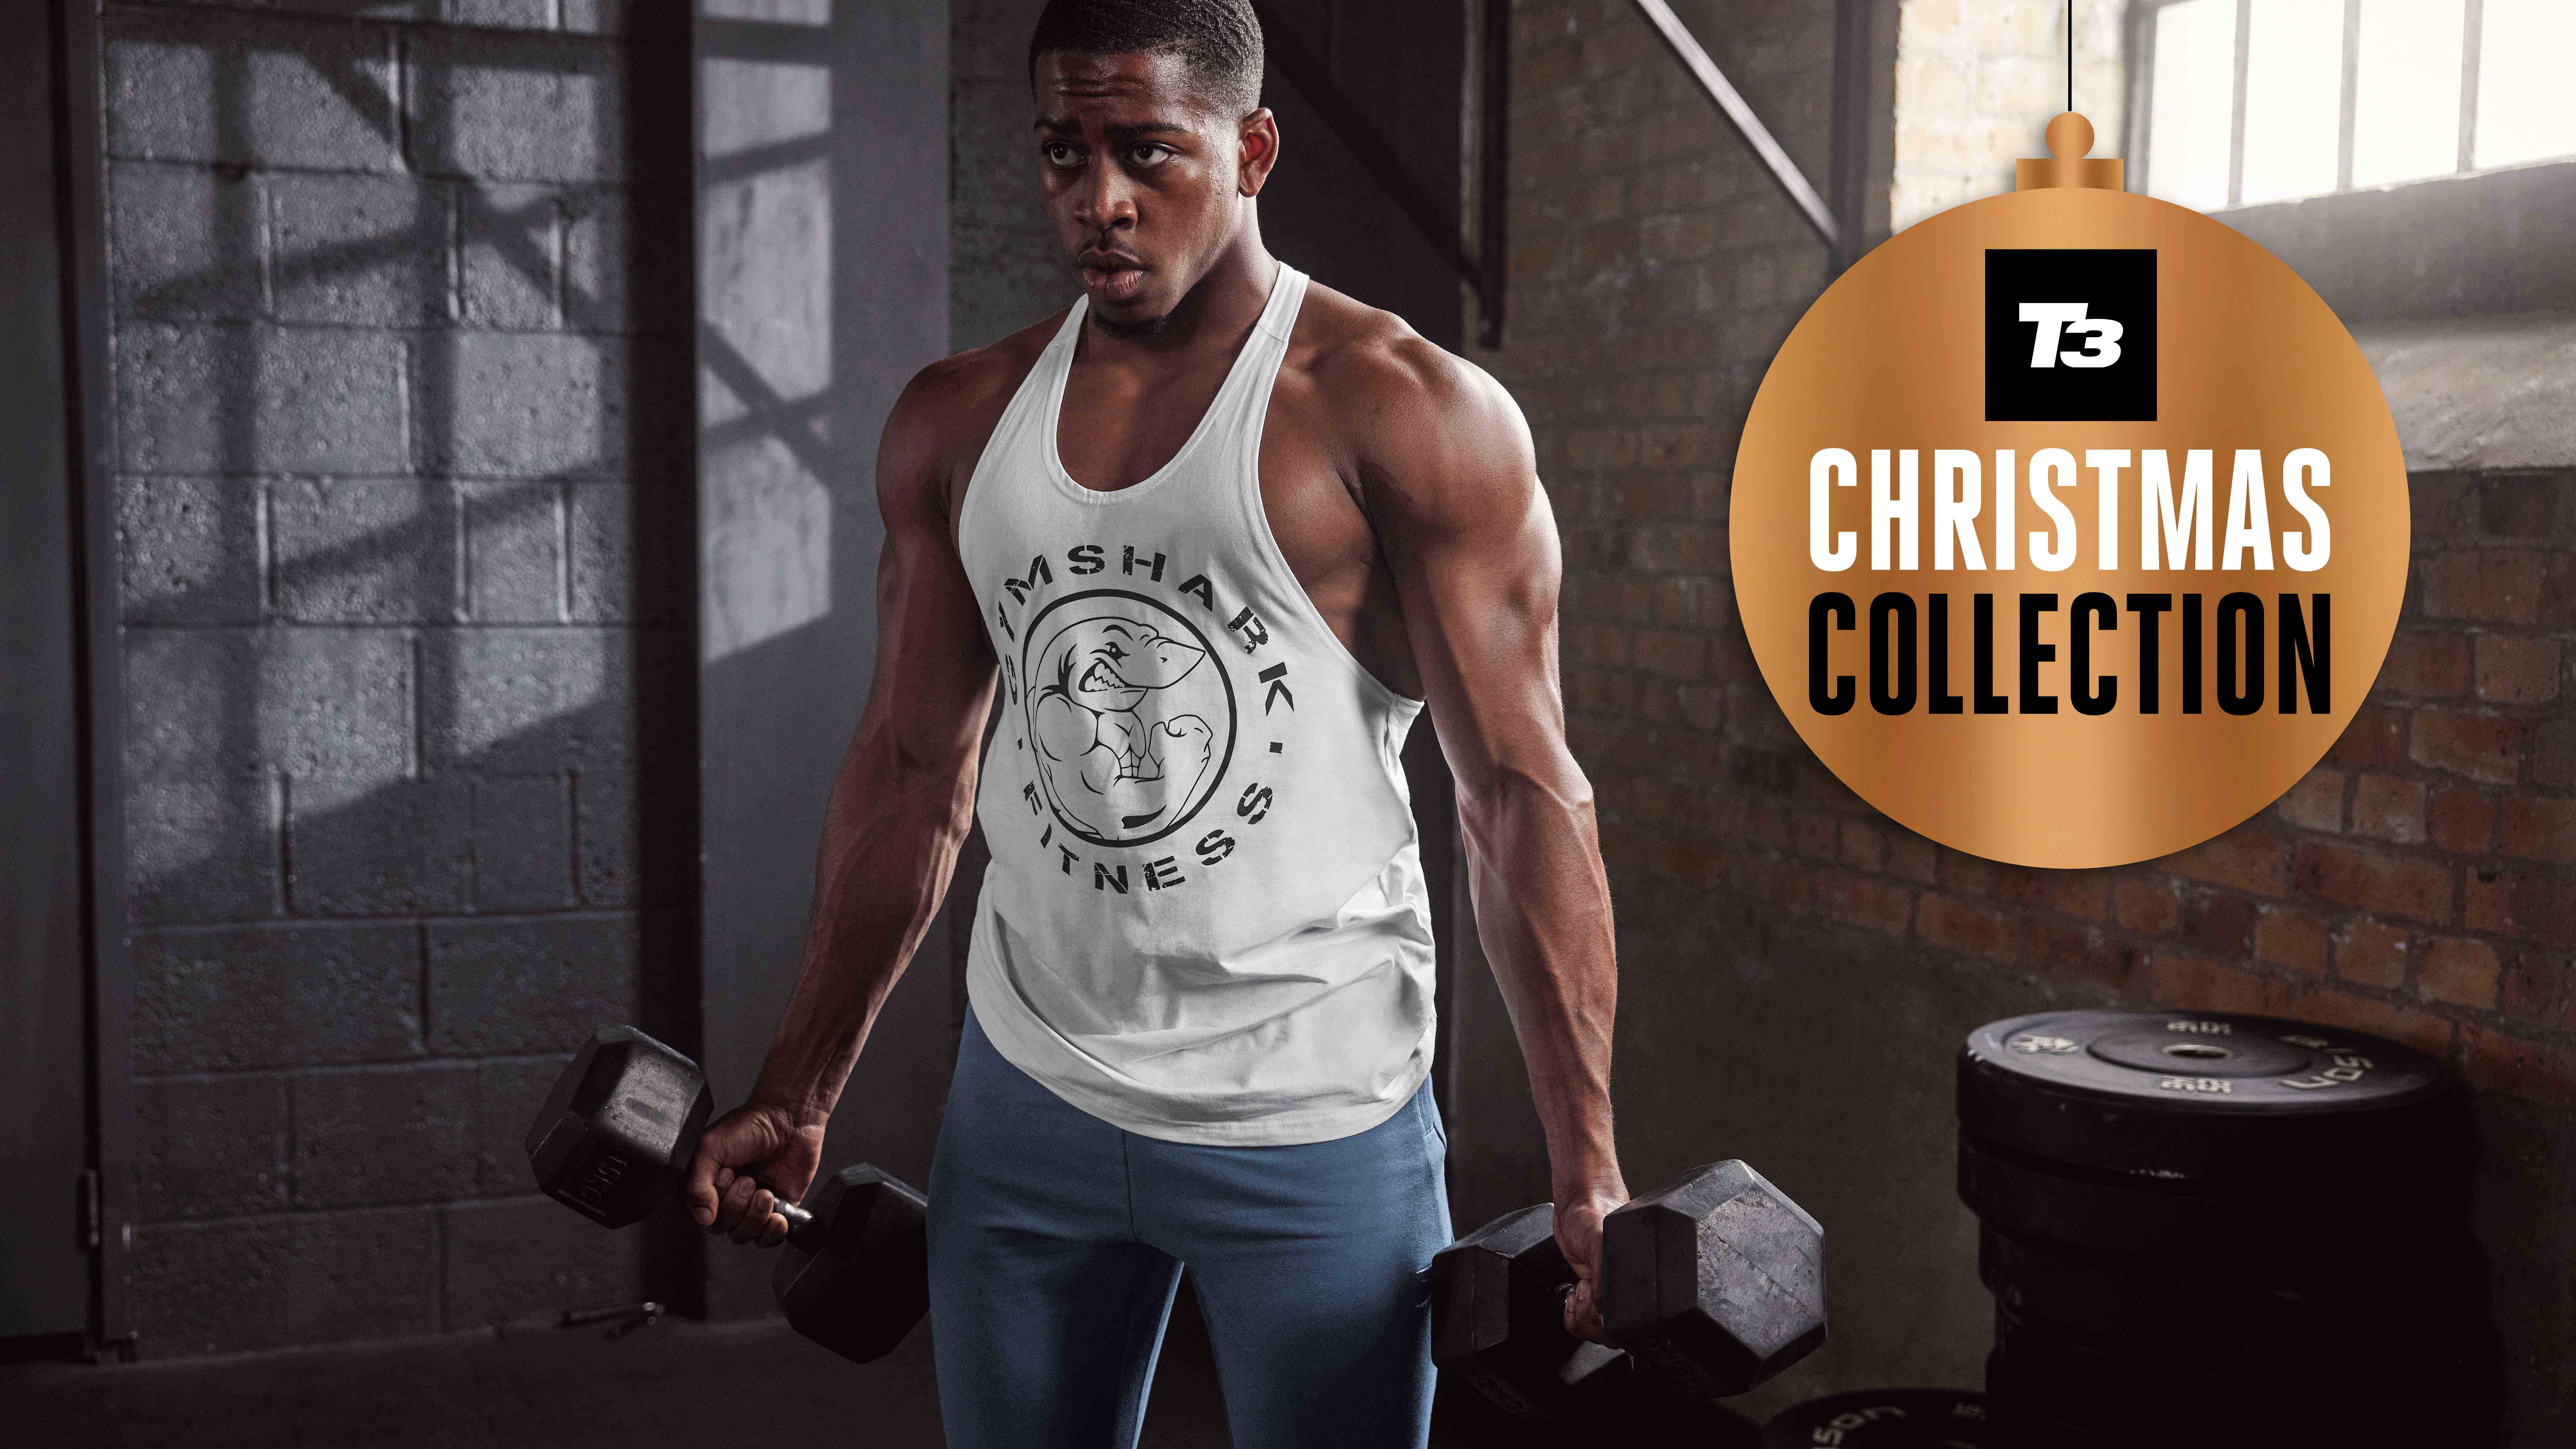 Gifts for Gym Lovers - Gift ideas for Men's - Gymshark